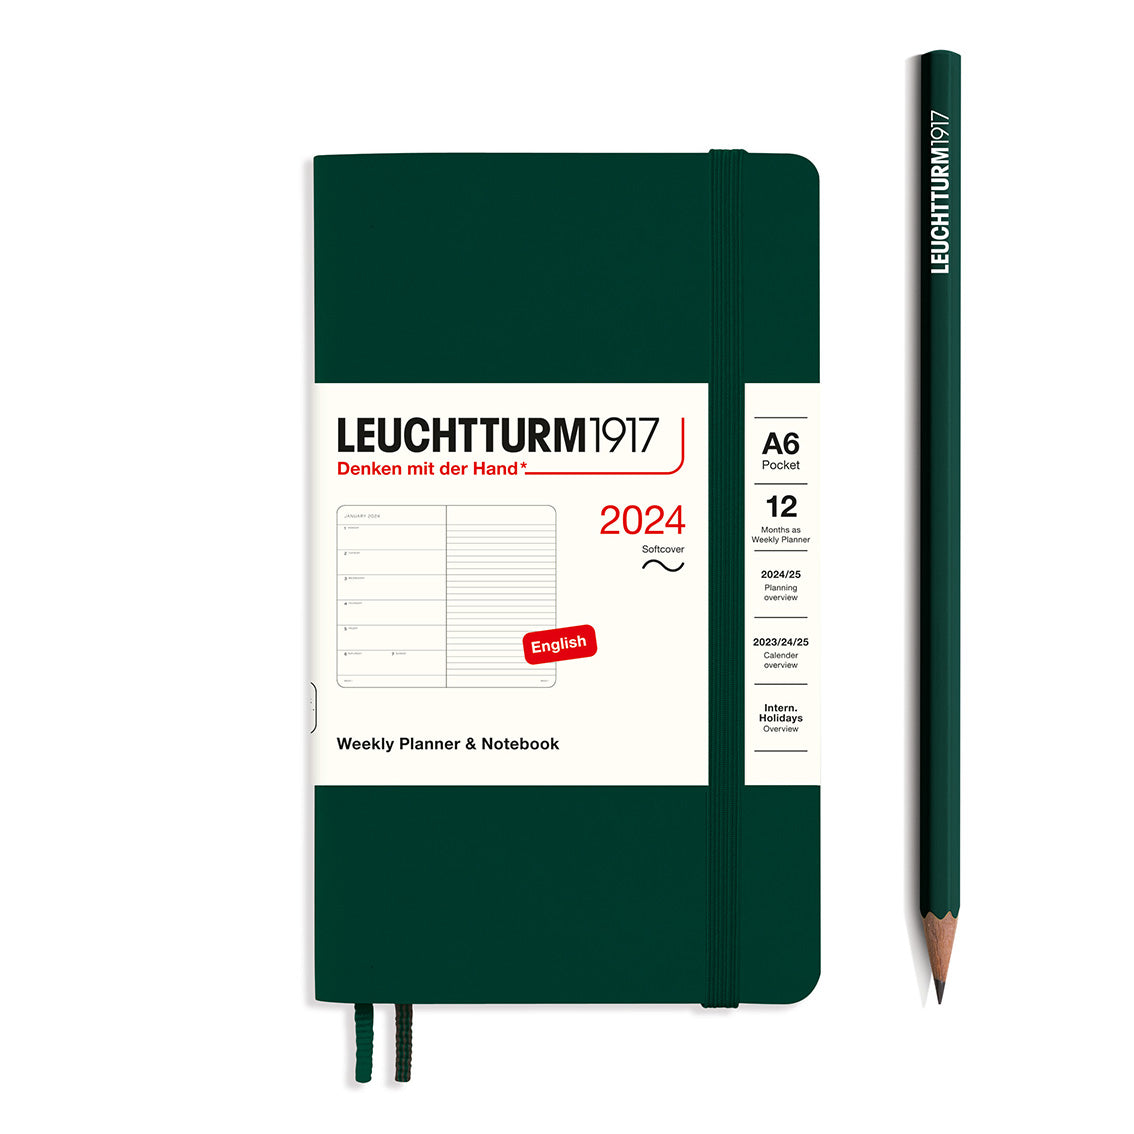 An image of a dark green planner with a dark green elastic band holding it together and a cream paper wrap around the middle stating the business name Leuchtturm1917, that it is for the year 2024, it is a weekly planner and notebook, is A6 in size and an English language version. It has an image on the wrap showing the inside layout which is a week on the left hand page and a notes page on thr right hand page. A dark green pencil is shown at the side of the planner.